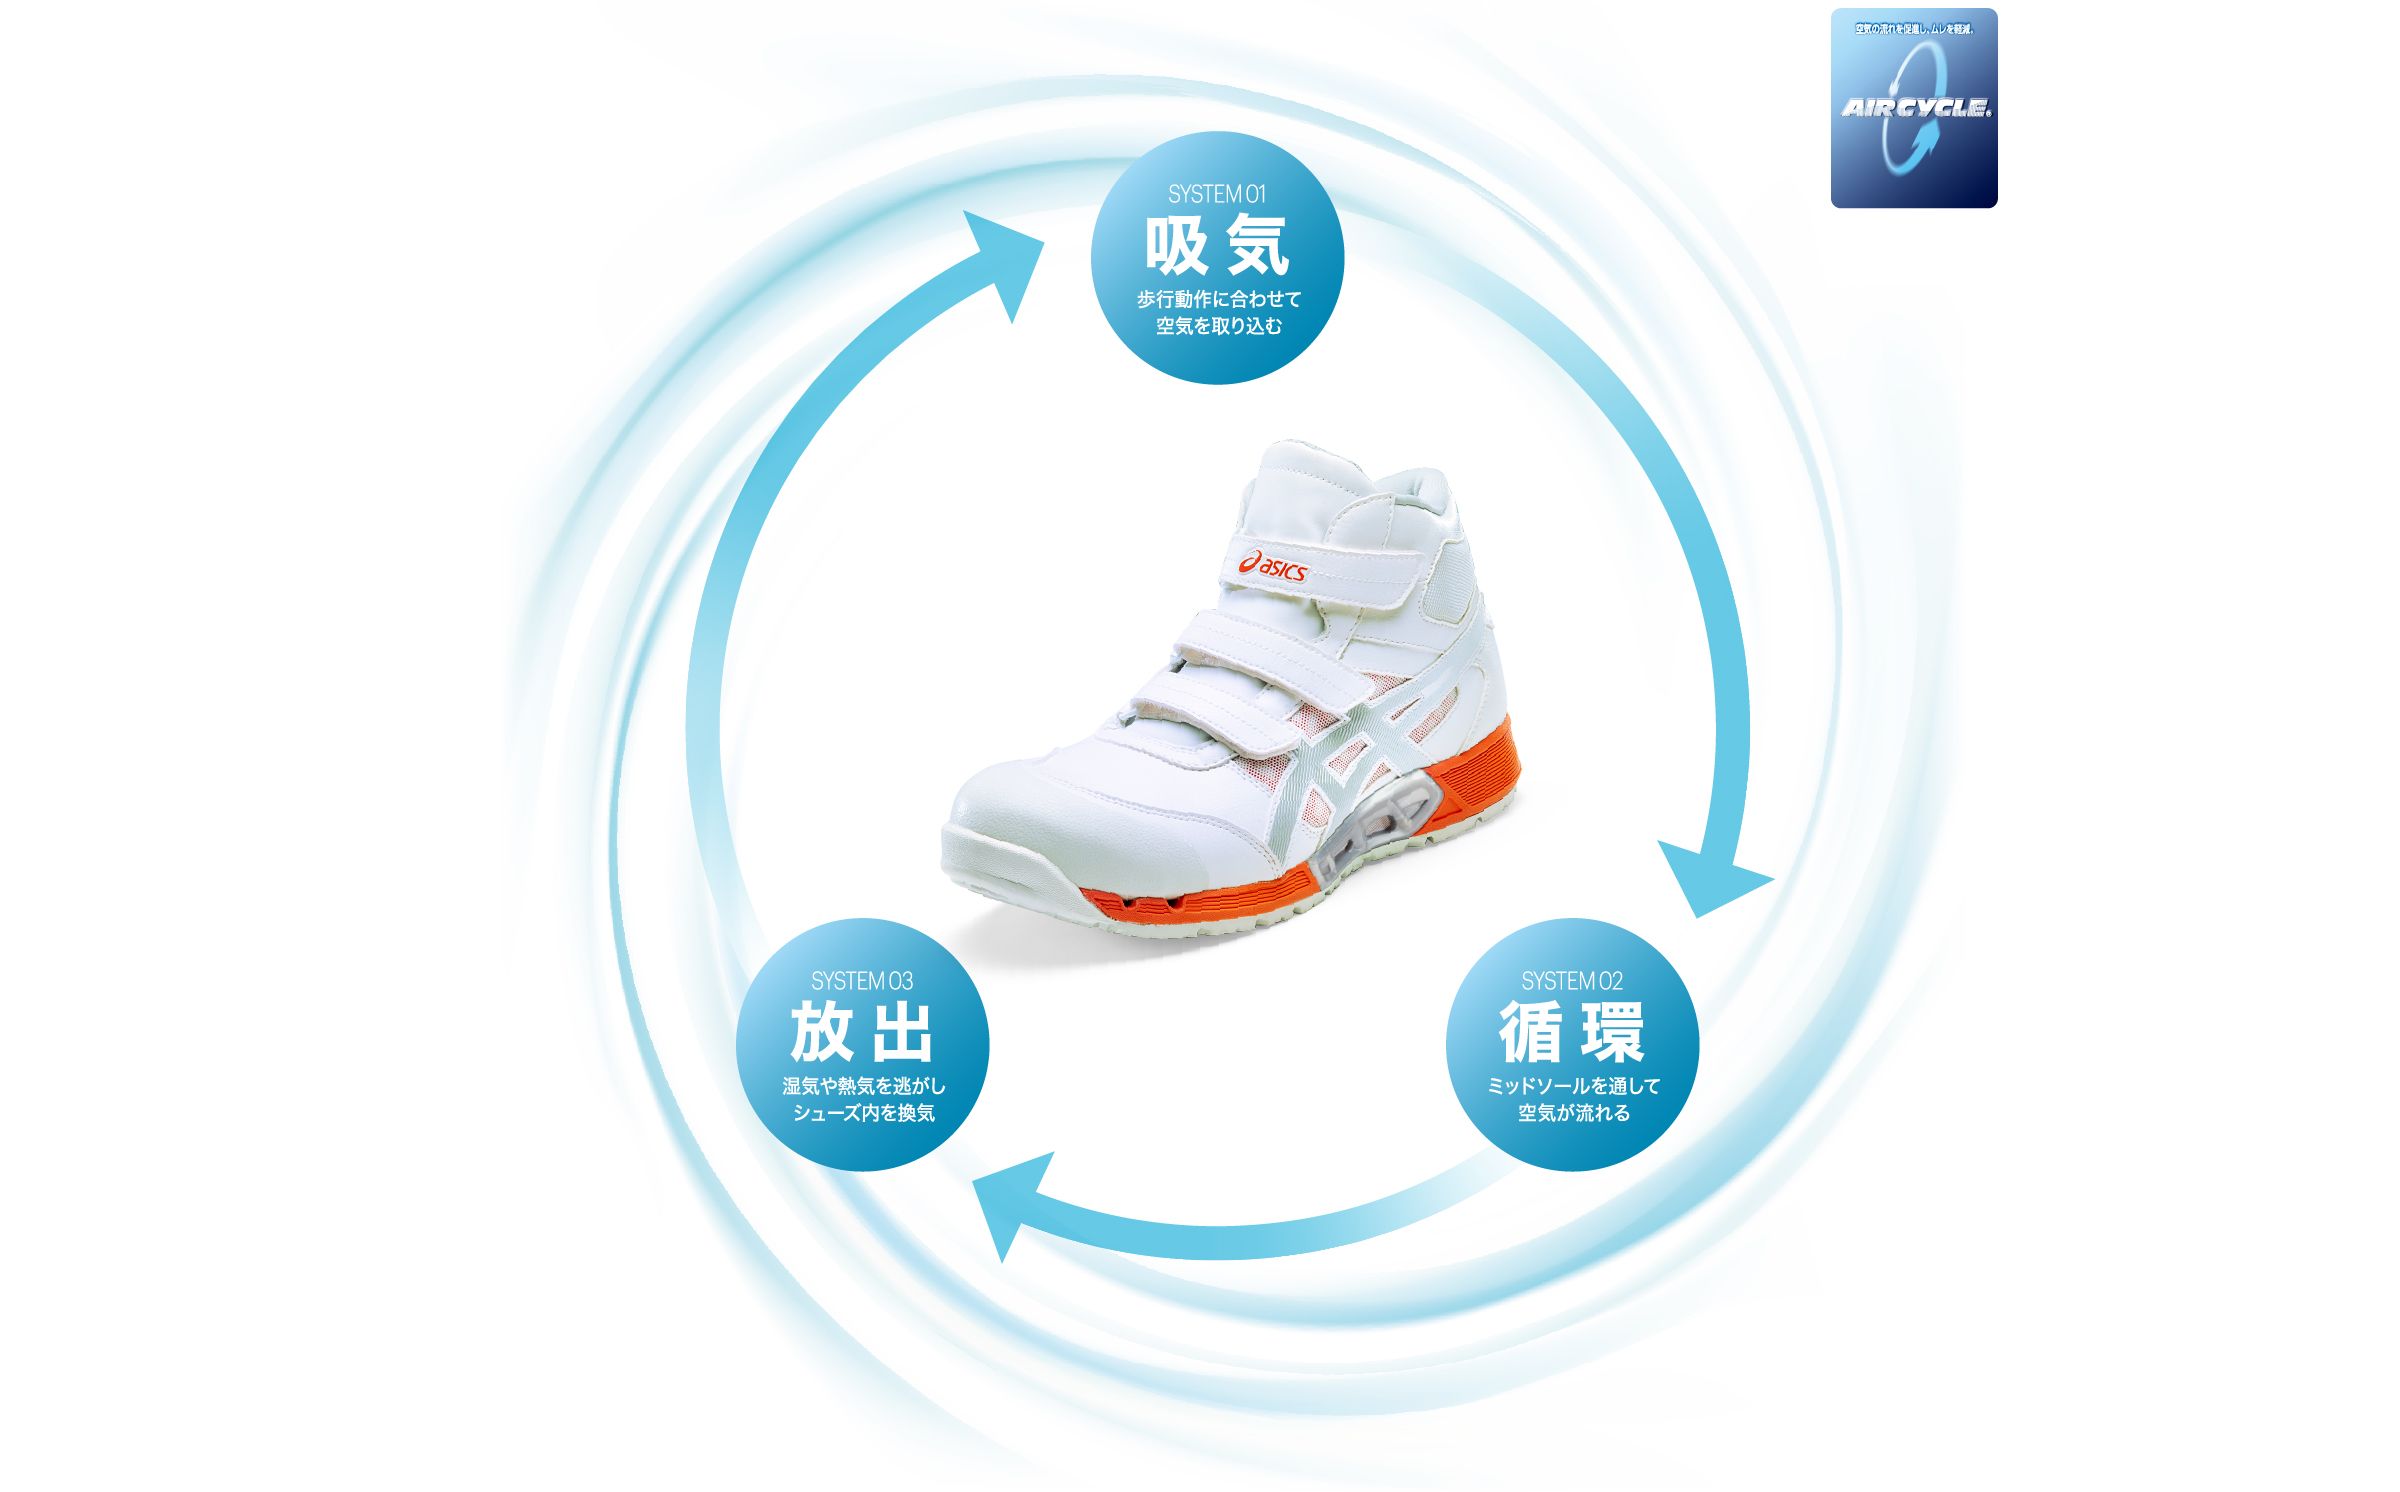 WINJOB®CP308 AC AIRCYCLE ®SYSTEM｜安全靴 ワークシューズ｜ASICS